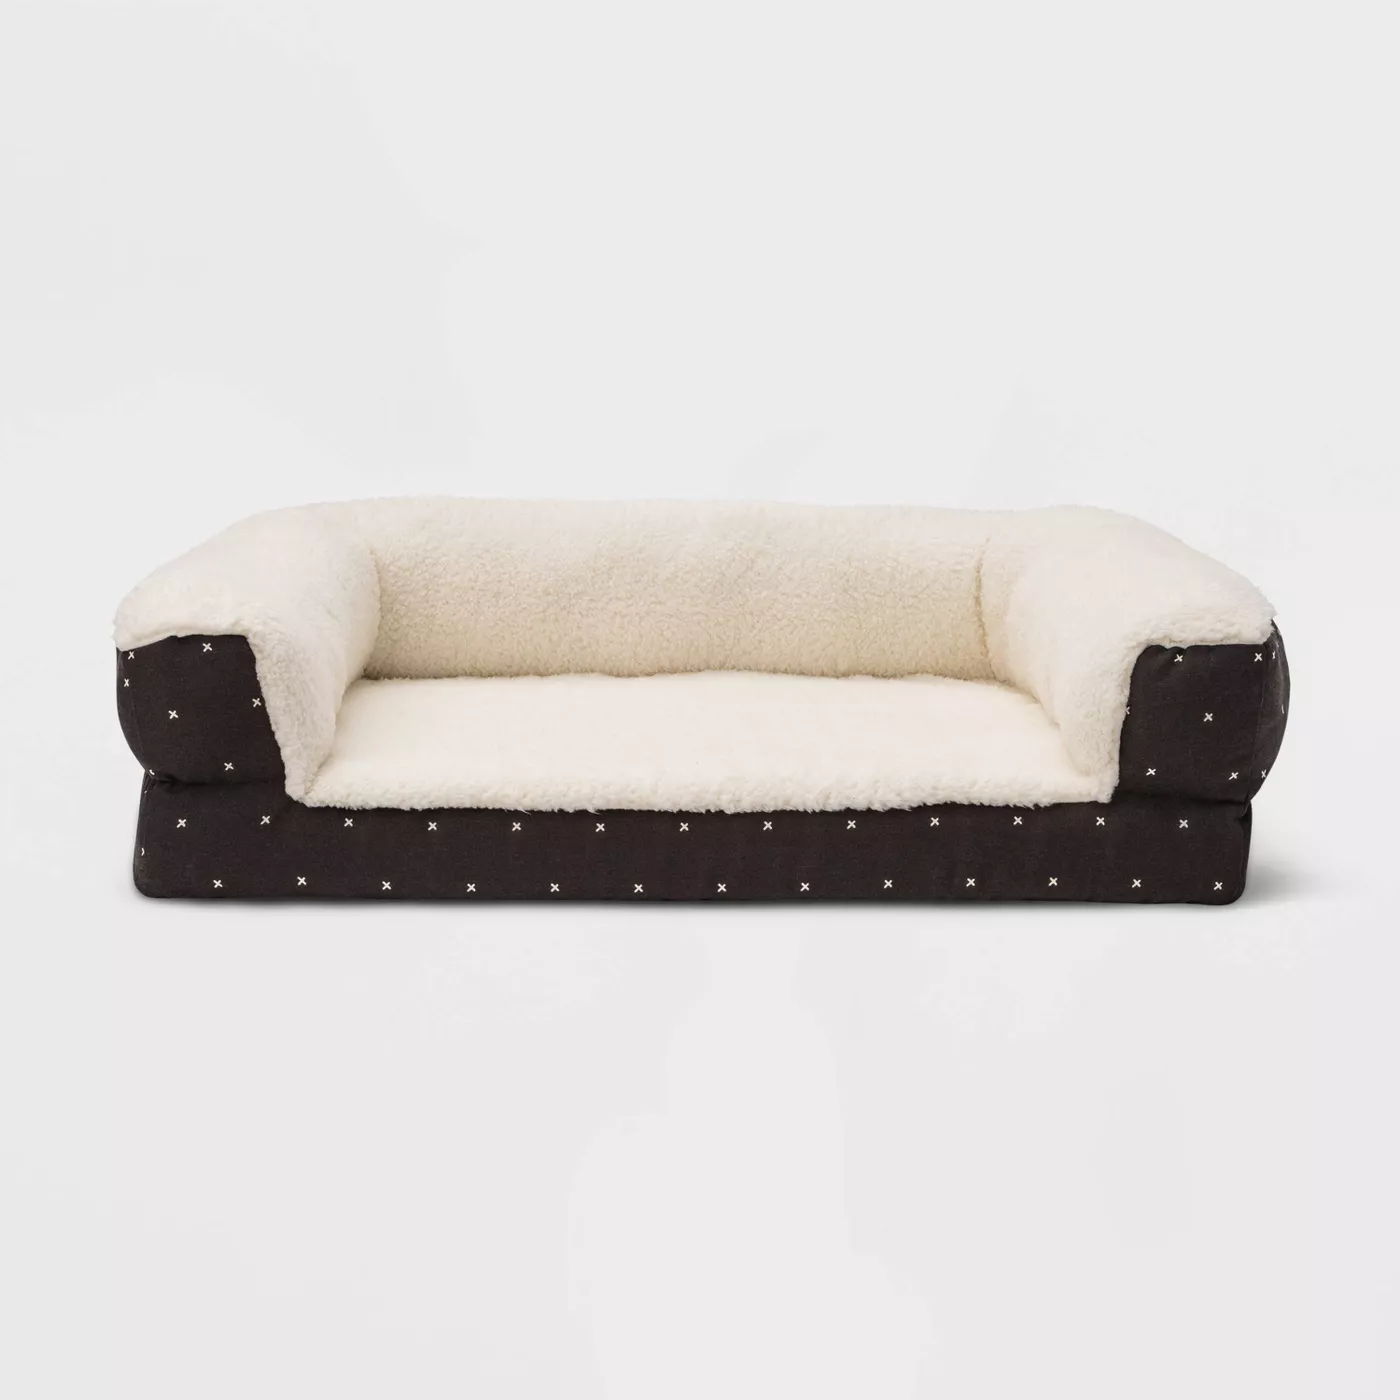 Modern Slant Couch Dog Beds - Boots & Barkley™ - image 1 of 4